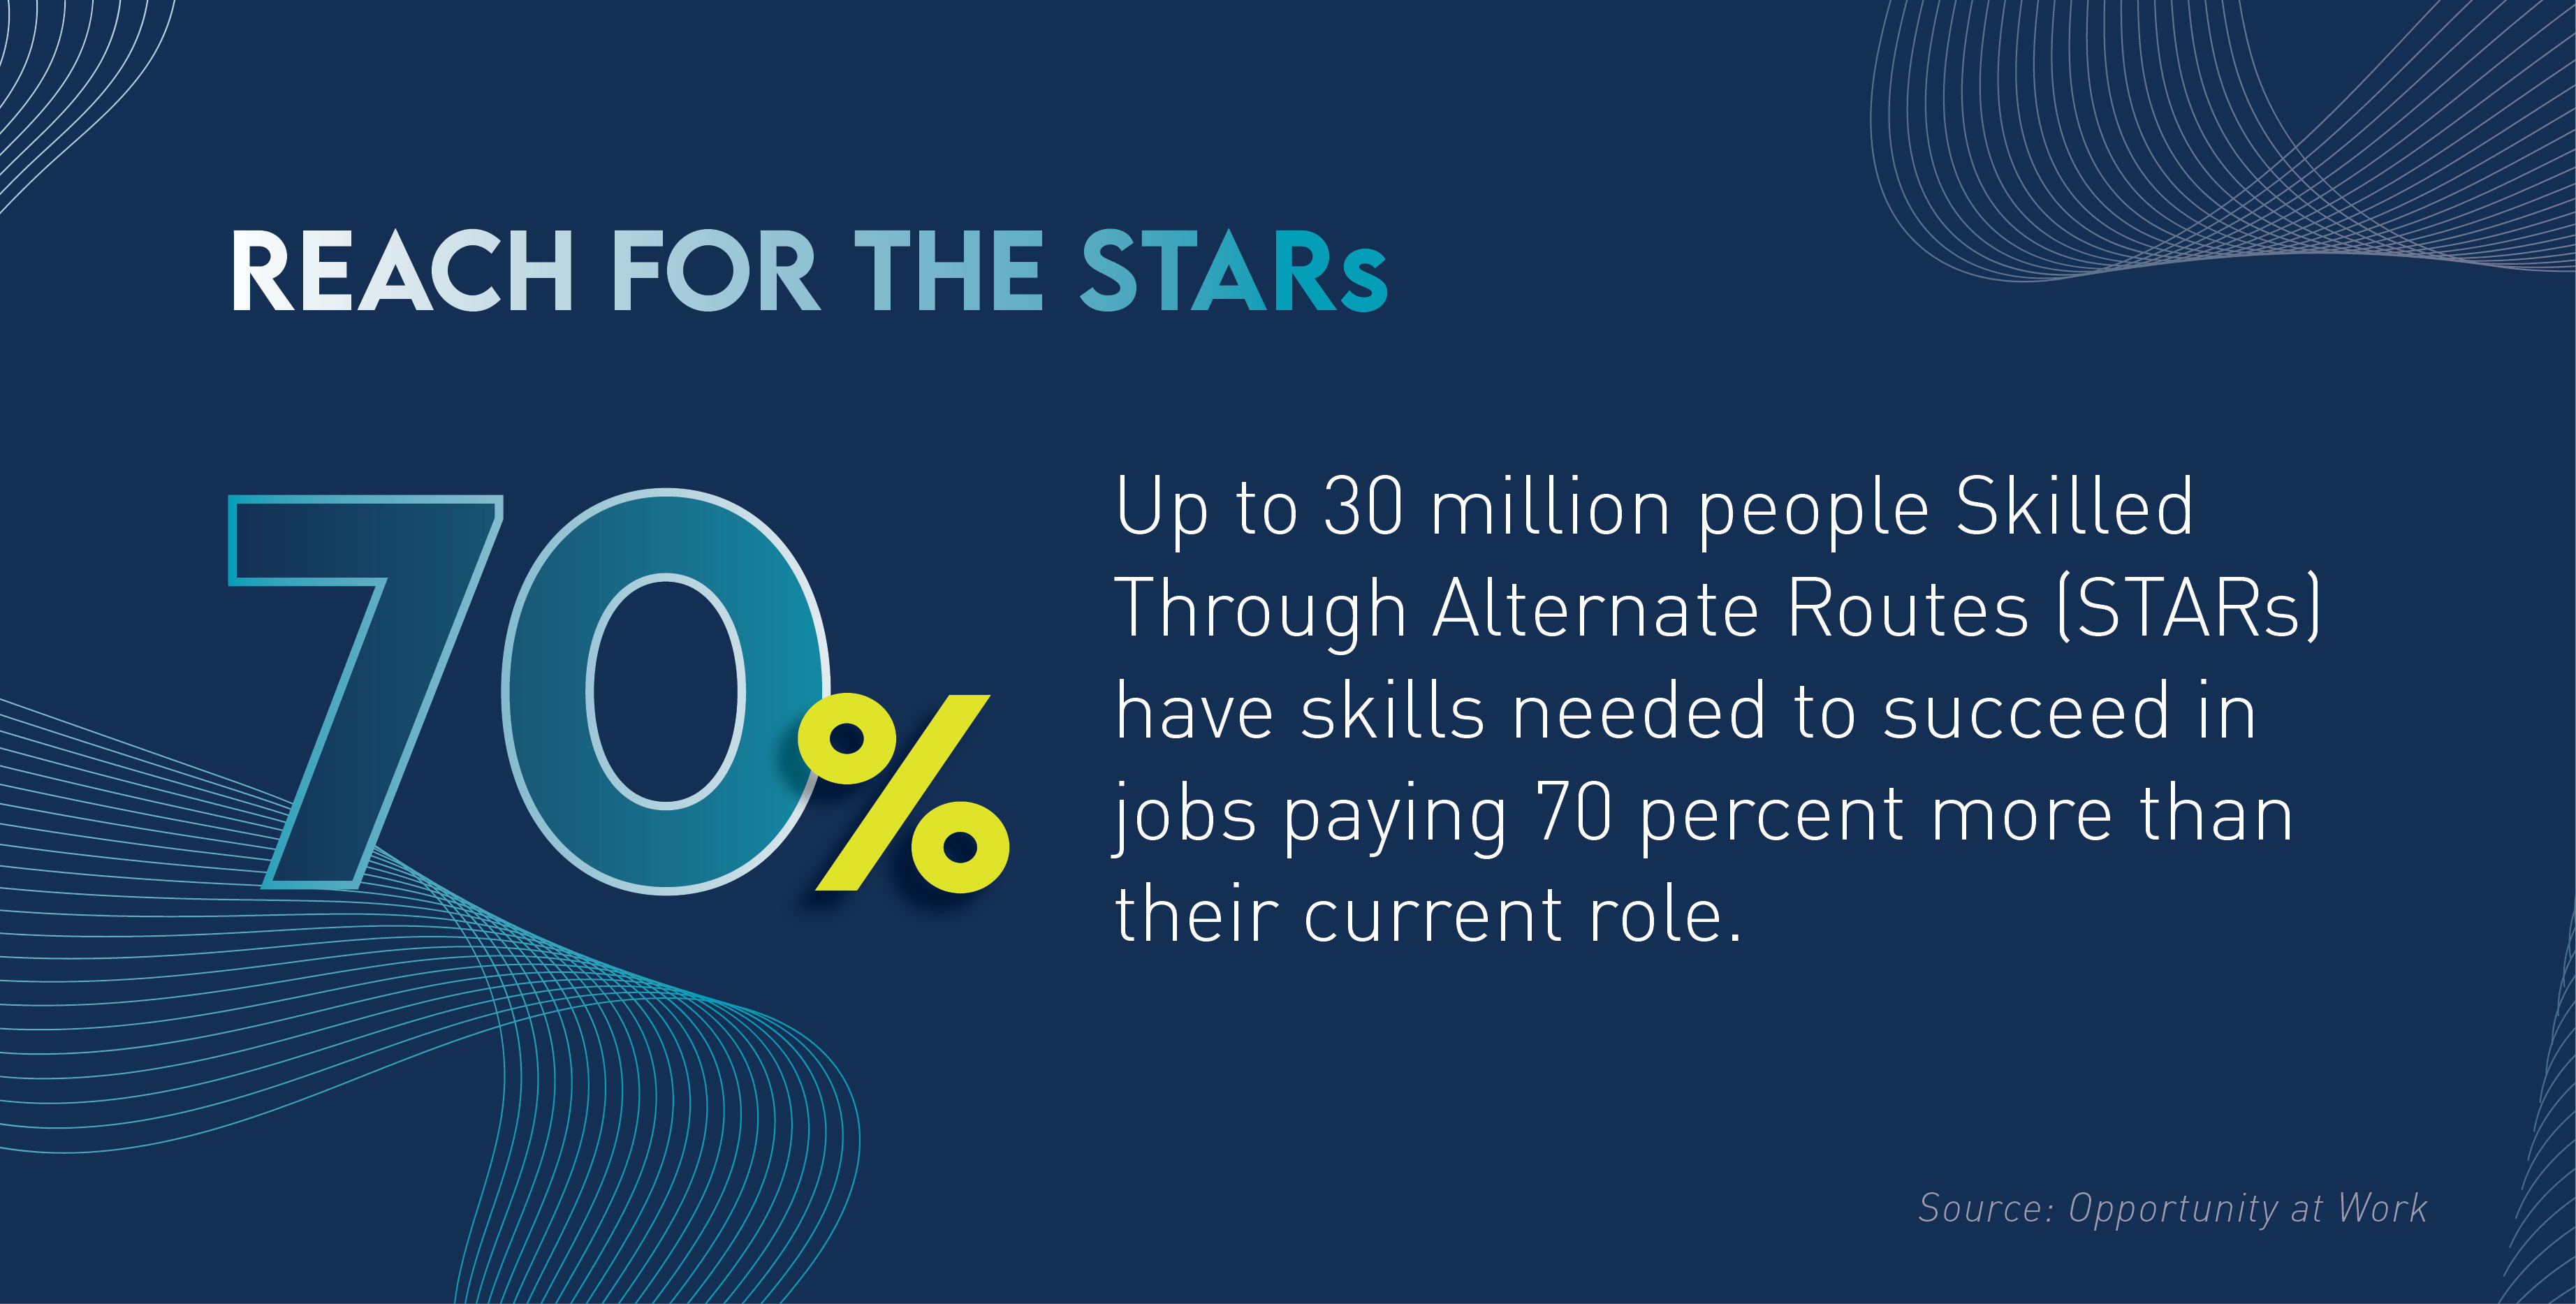 Graphic with the text: "Reach for the S.T.A.R.s - Up to 30 million people Skilled Through Alternate Routes (STARs) have skills needed to succeed in jobs paying 70 percent more than their current role."